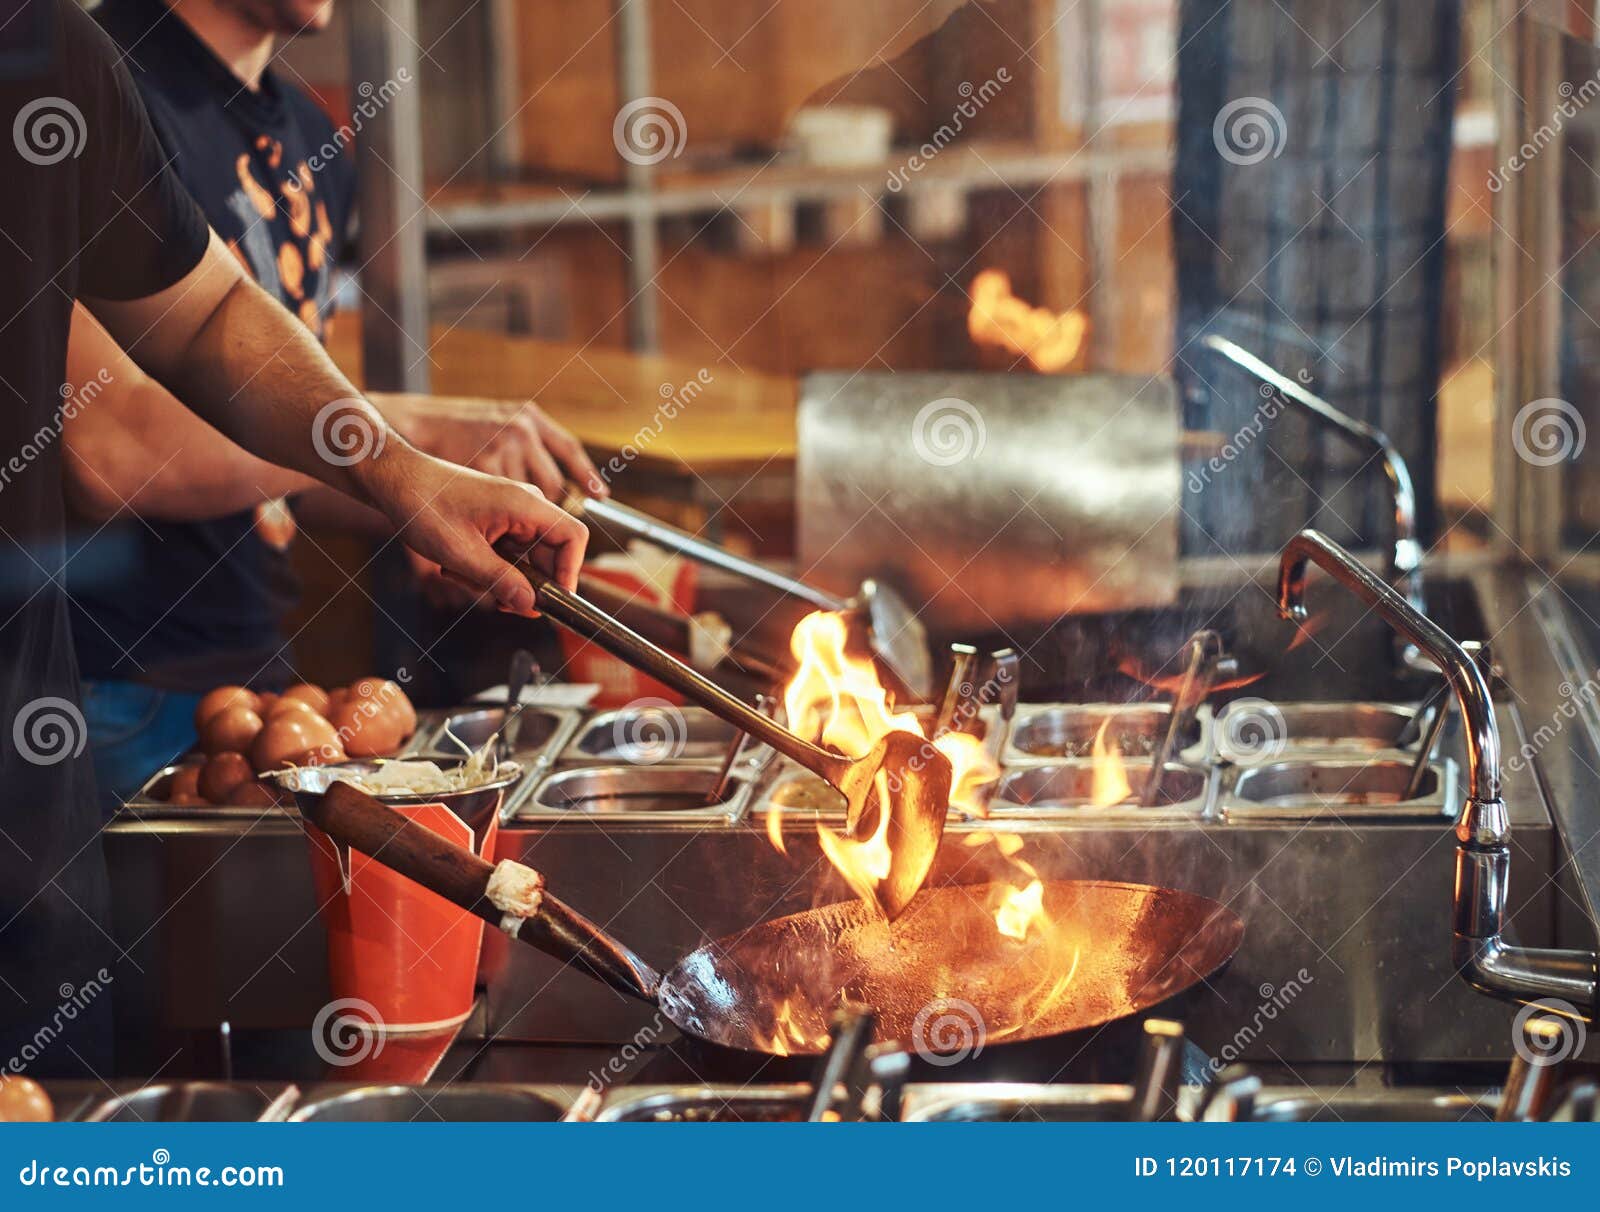 Unrecognizable man cooking in fatiscent big pan or wok in a small